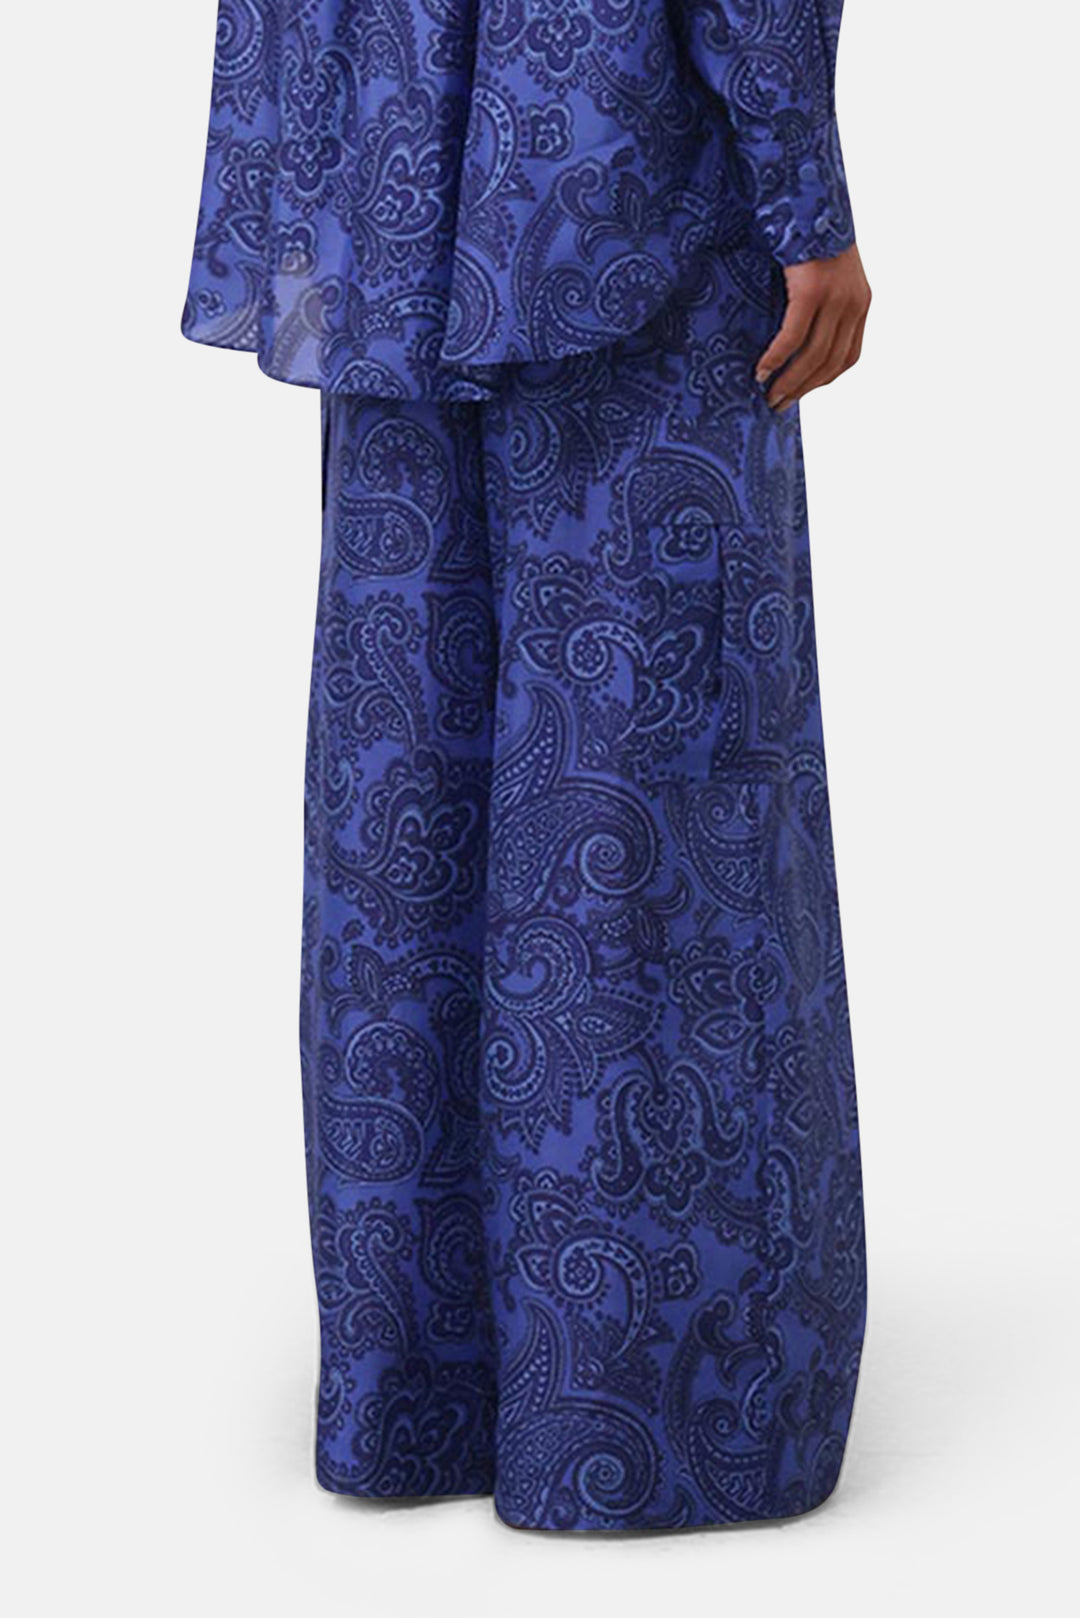 Ottie Relaxed Pant Blue Paisley